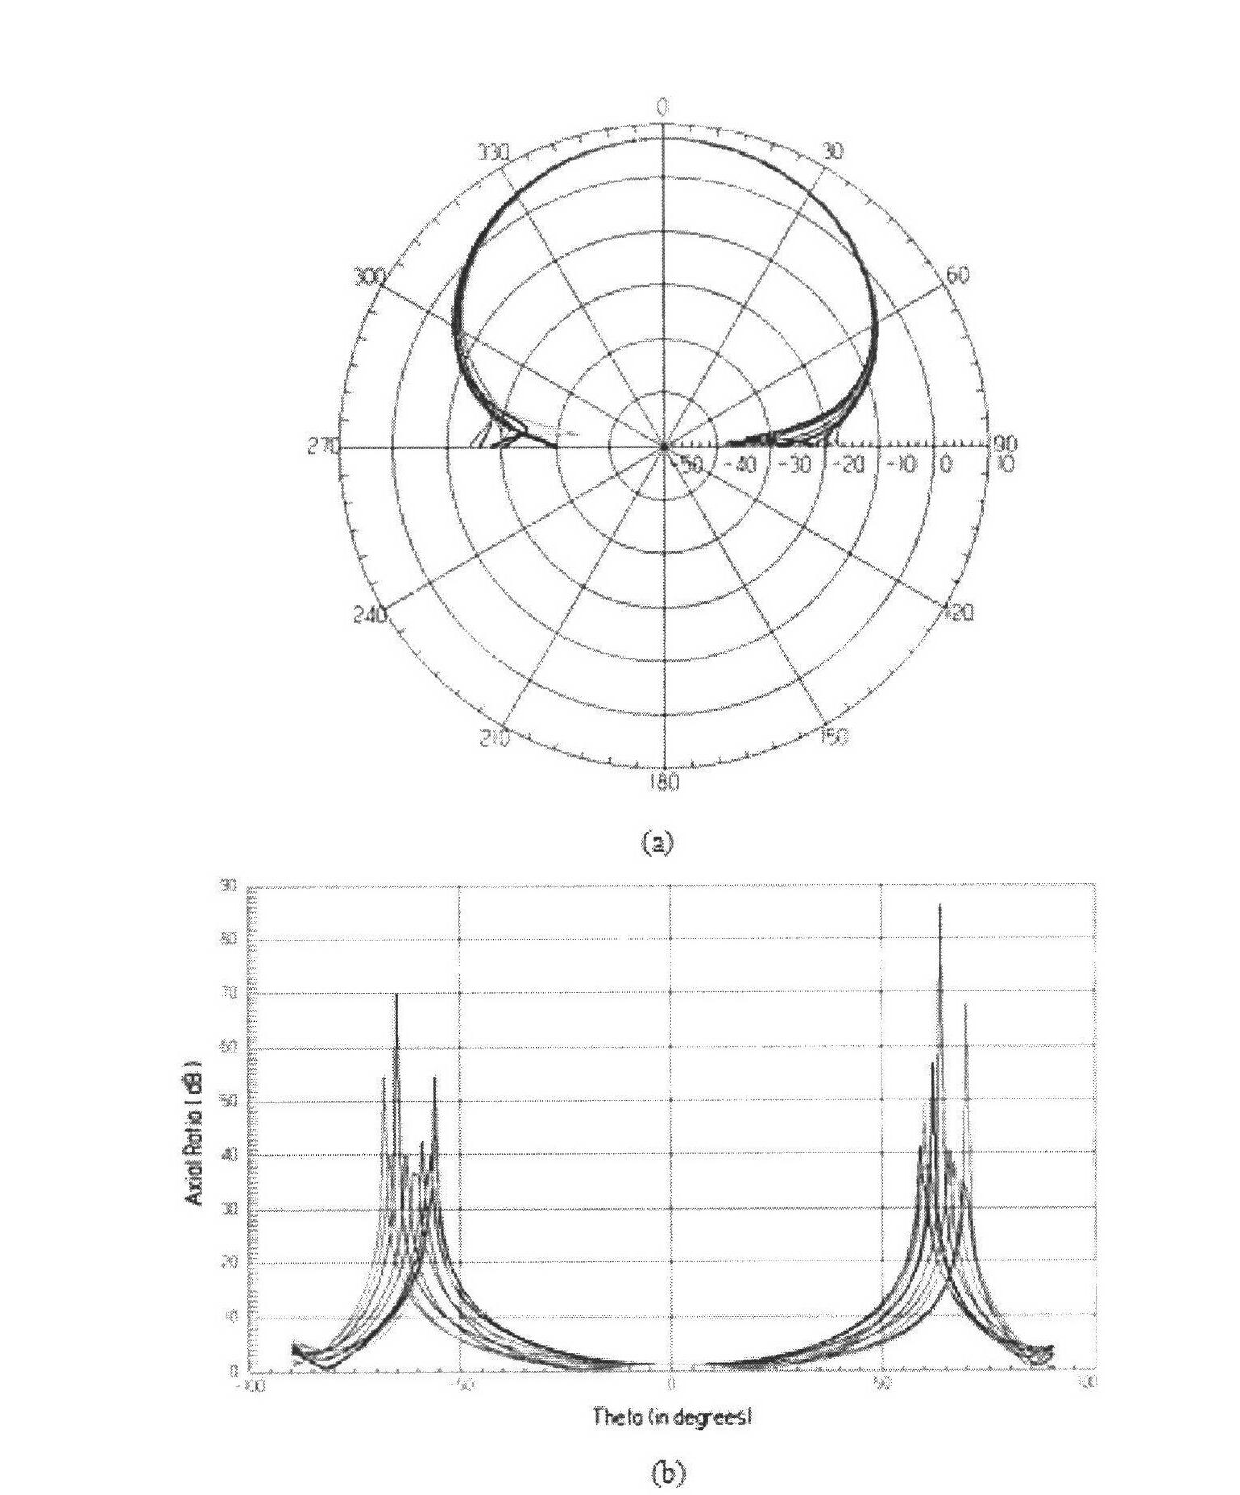 Simple dual-frequency dual-circularly-polarized parabolic reflector antenna feed source